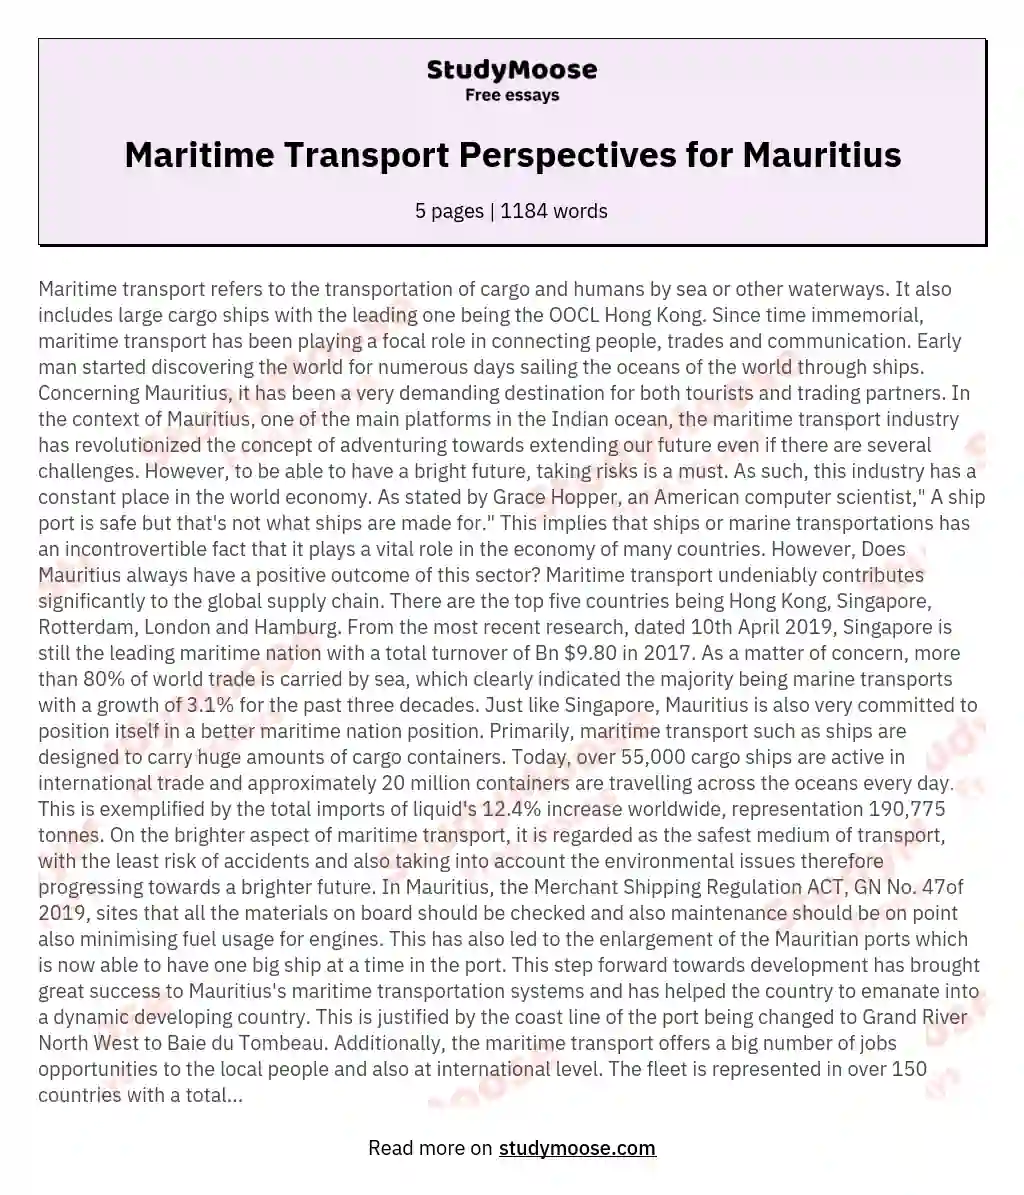 Maritime Transport Perspectives for Mauritius essay